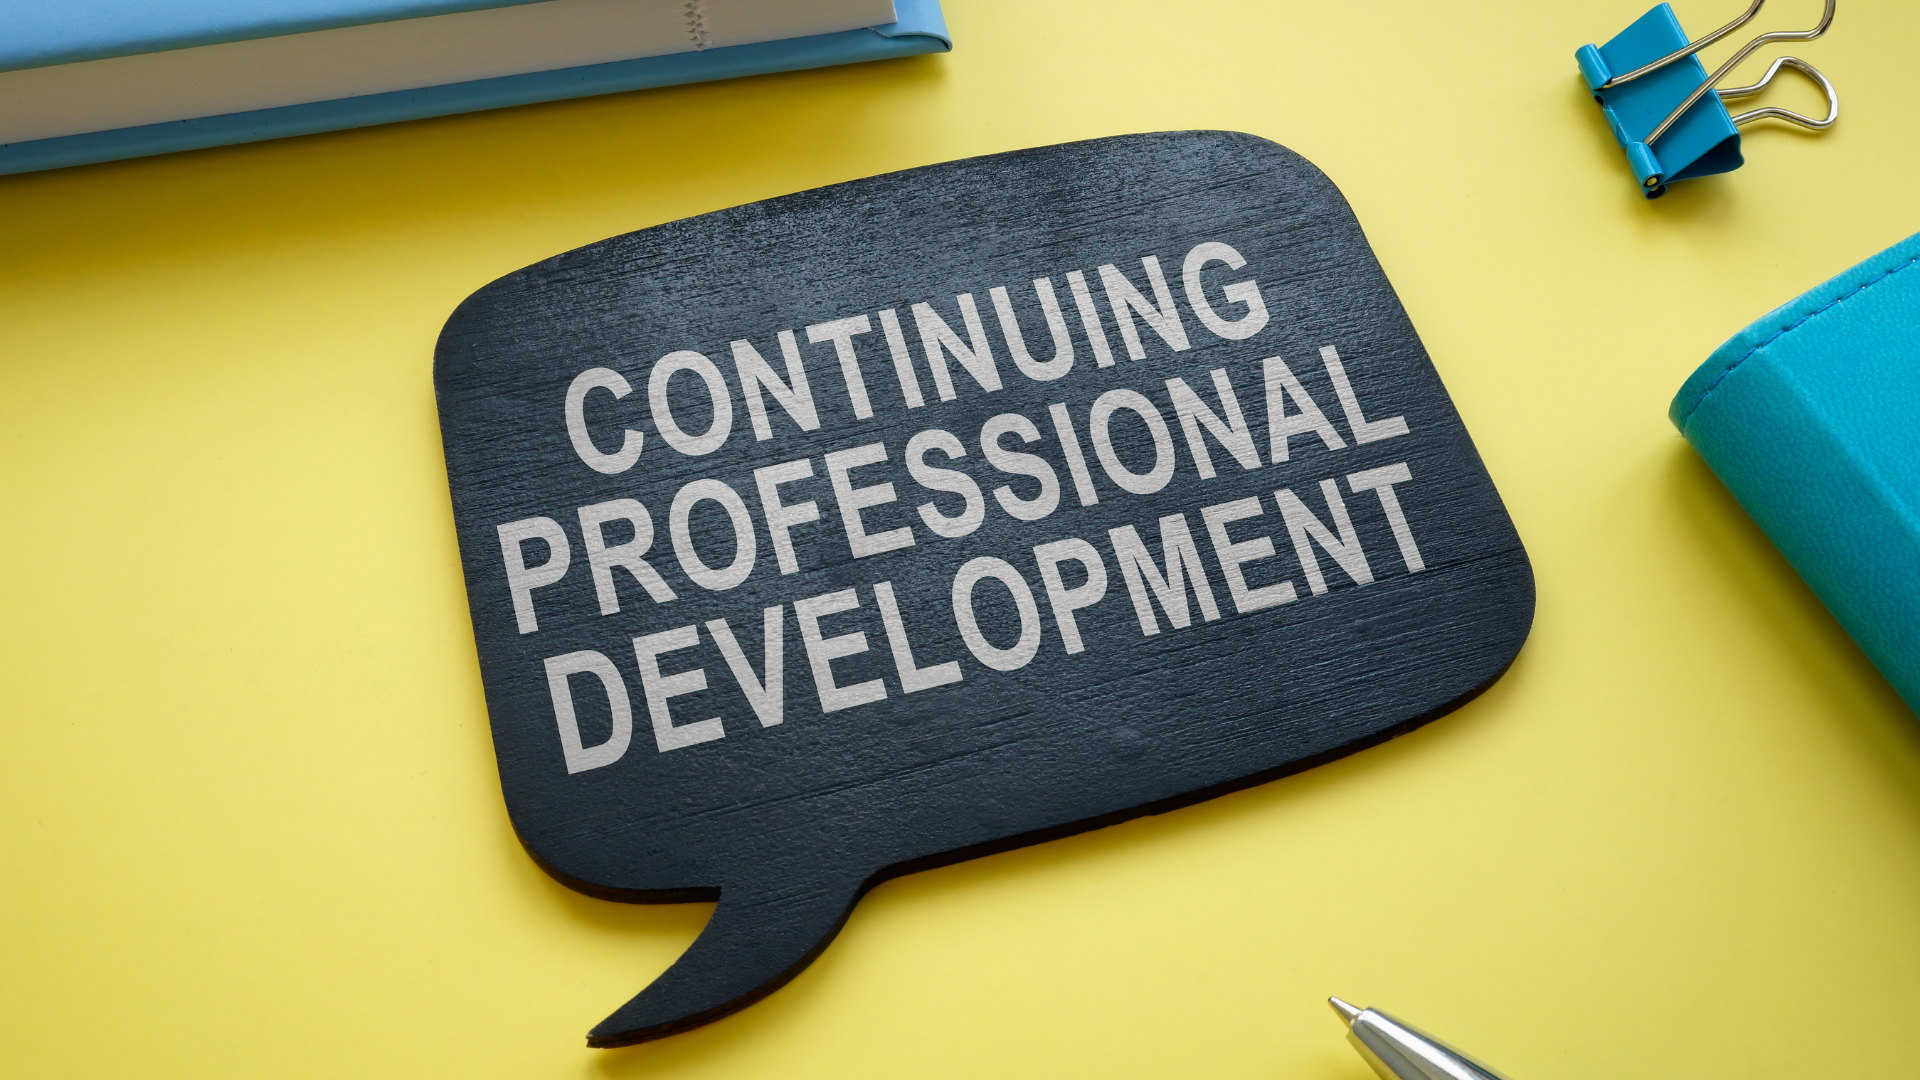 What is continuous professional development and why is it important?